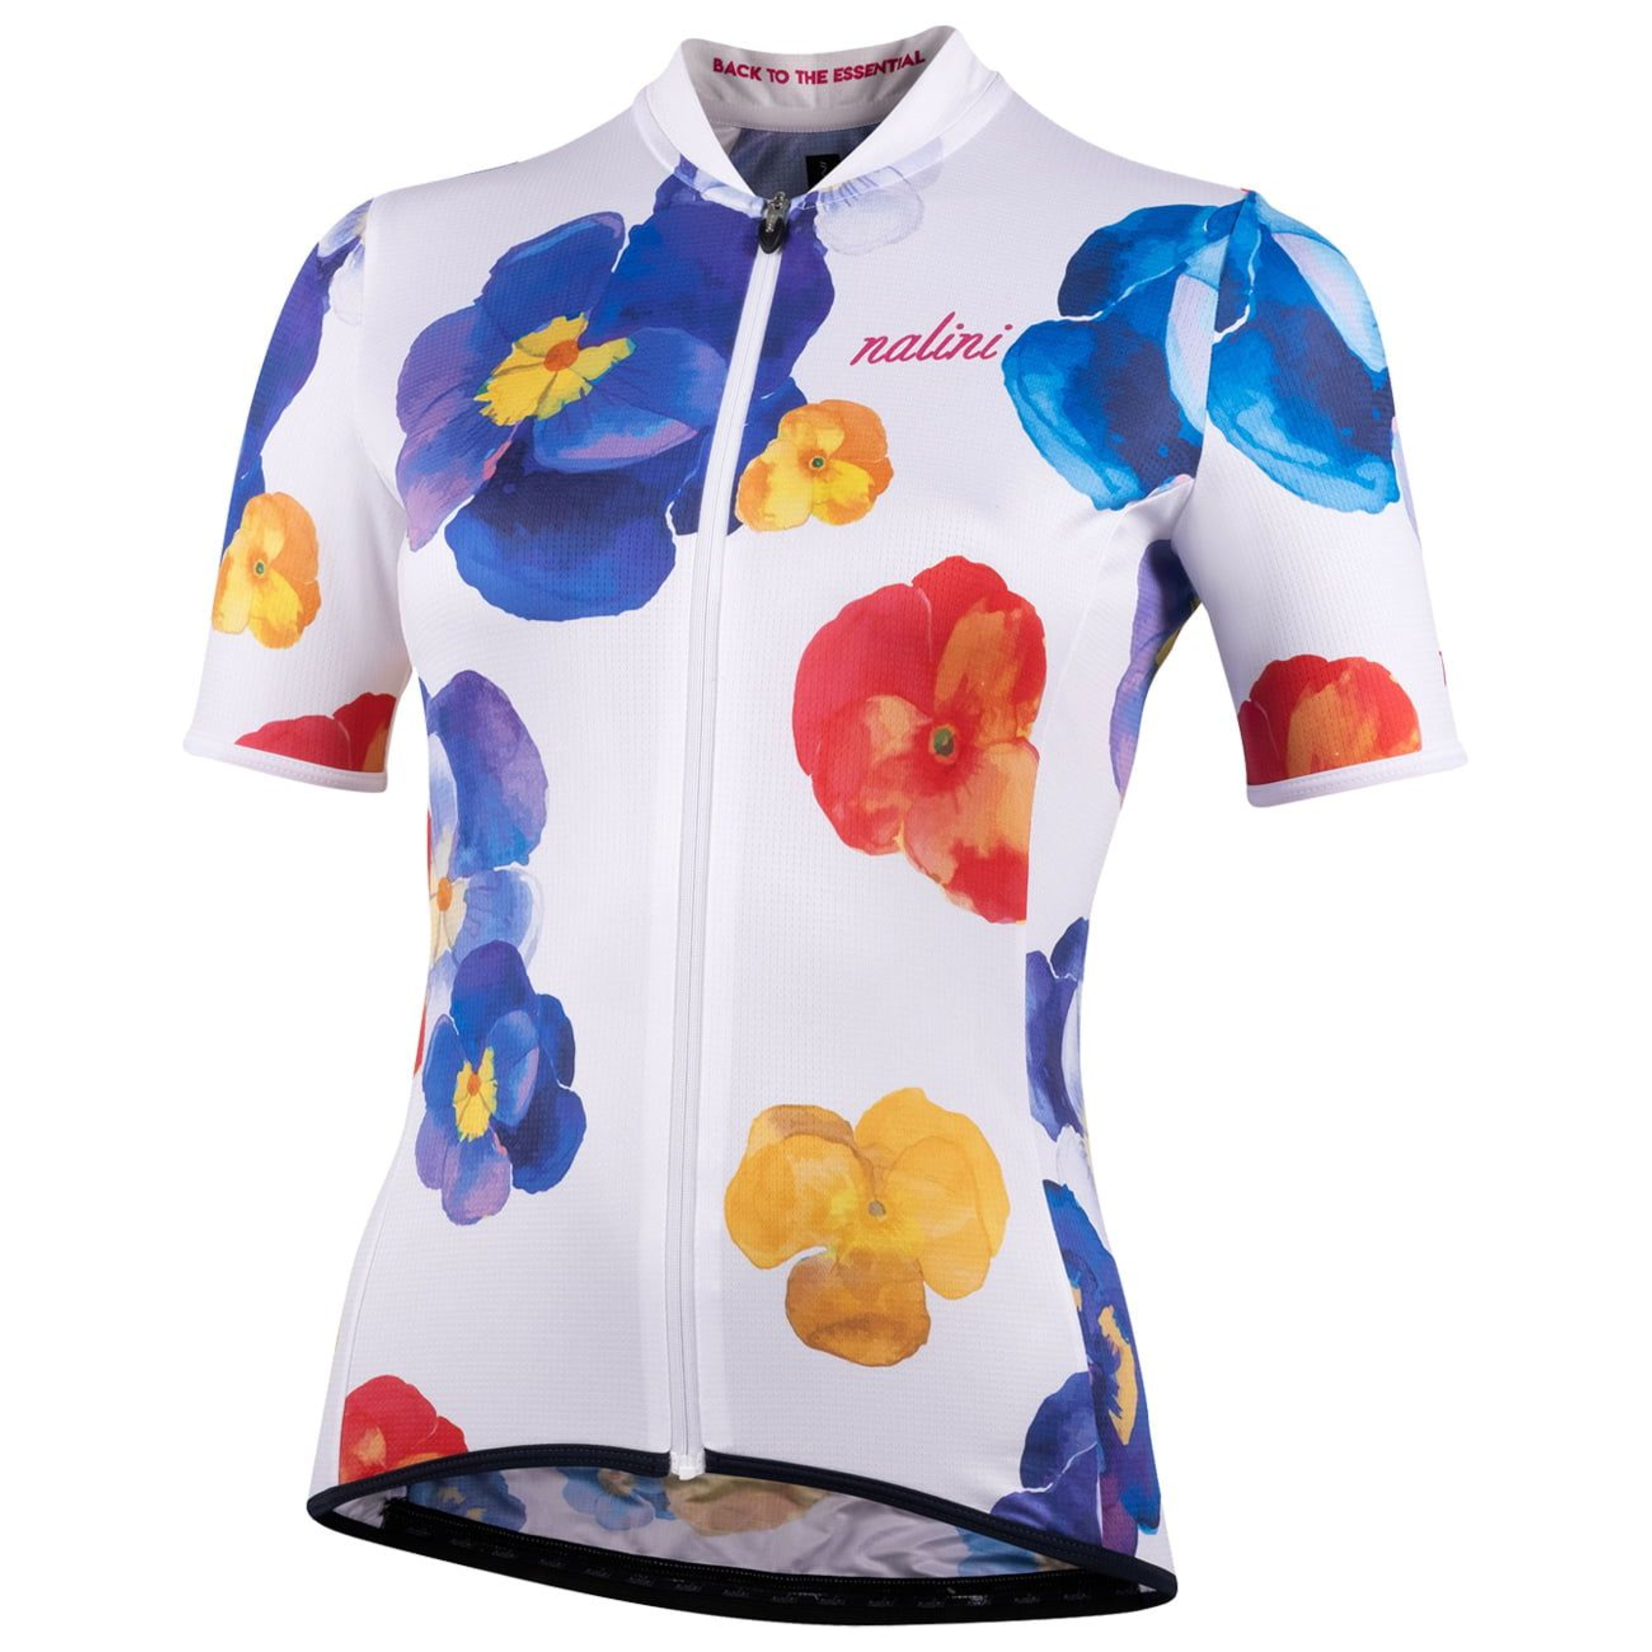 Maillot à Manches Courtes Femme Nalini New Turin 2006 W Jersey Flowers Small